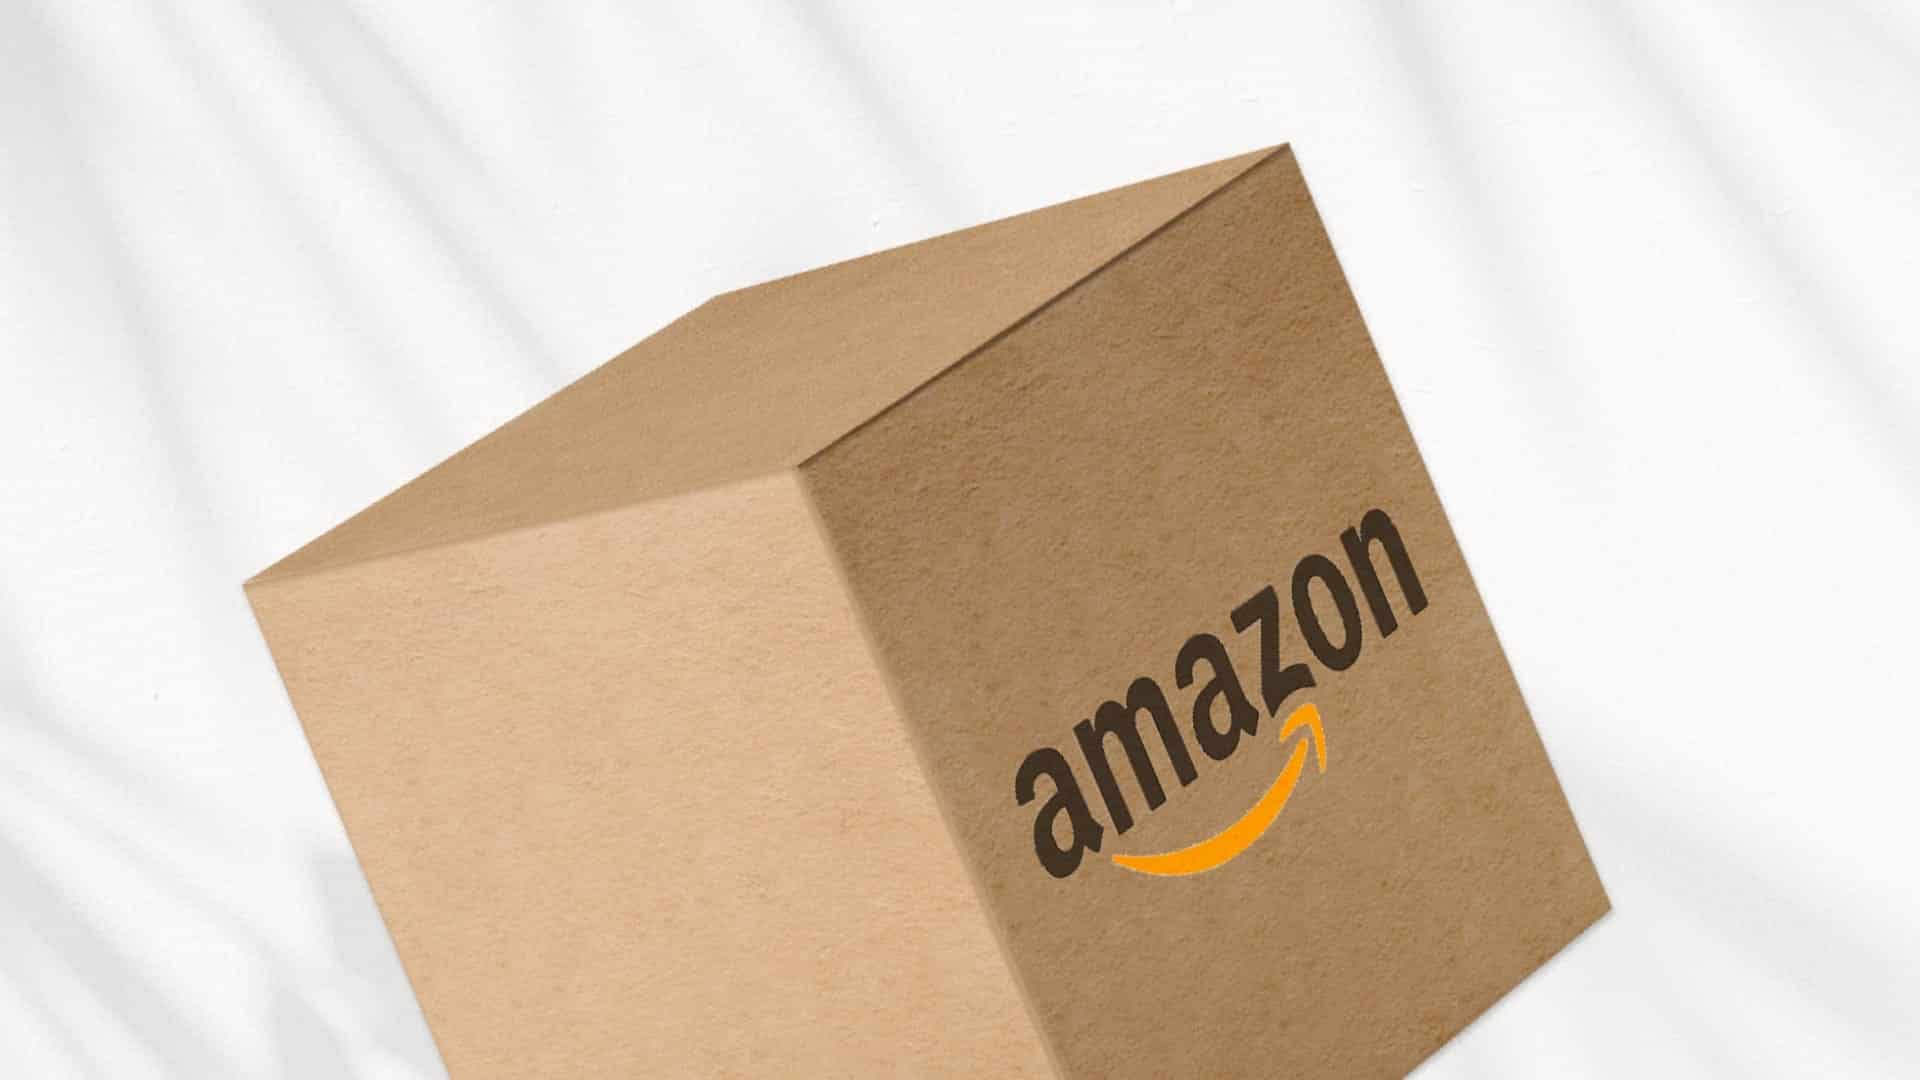 do i need a license to sell on amazon in uae